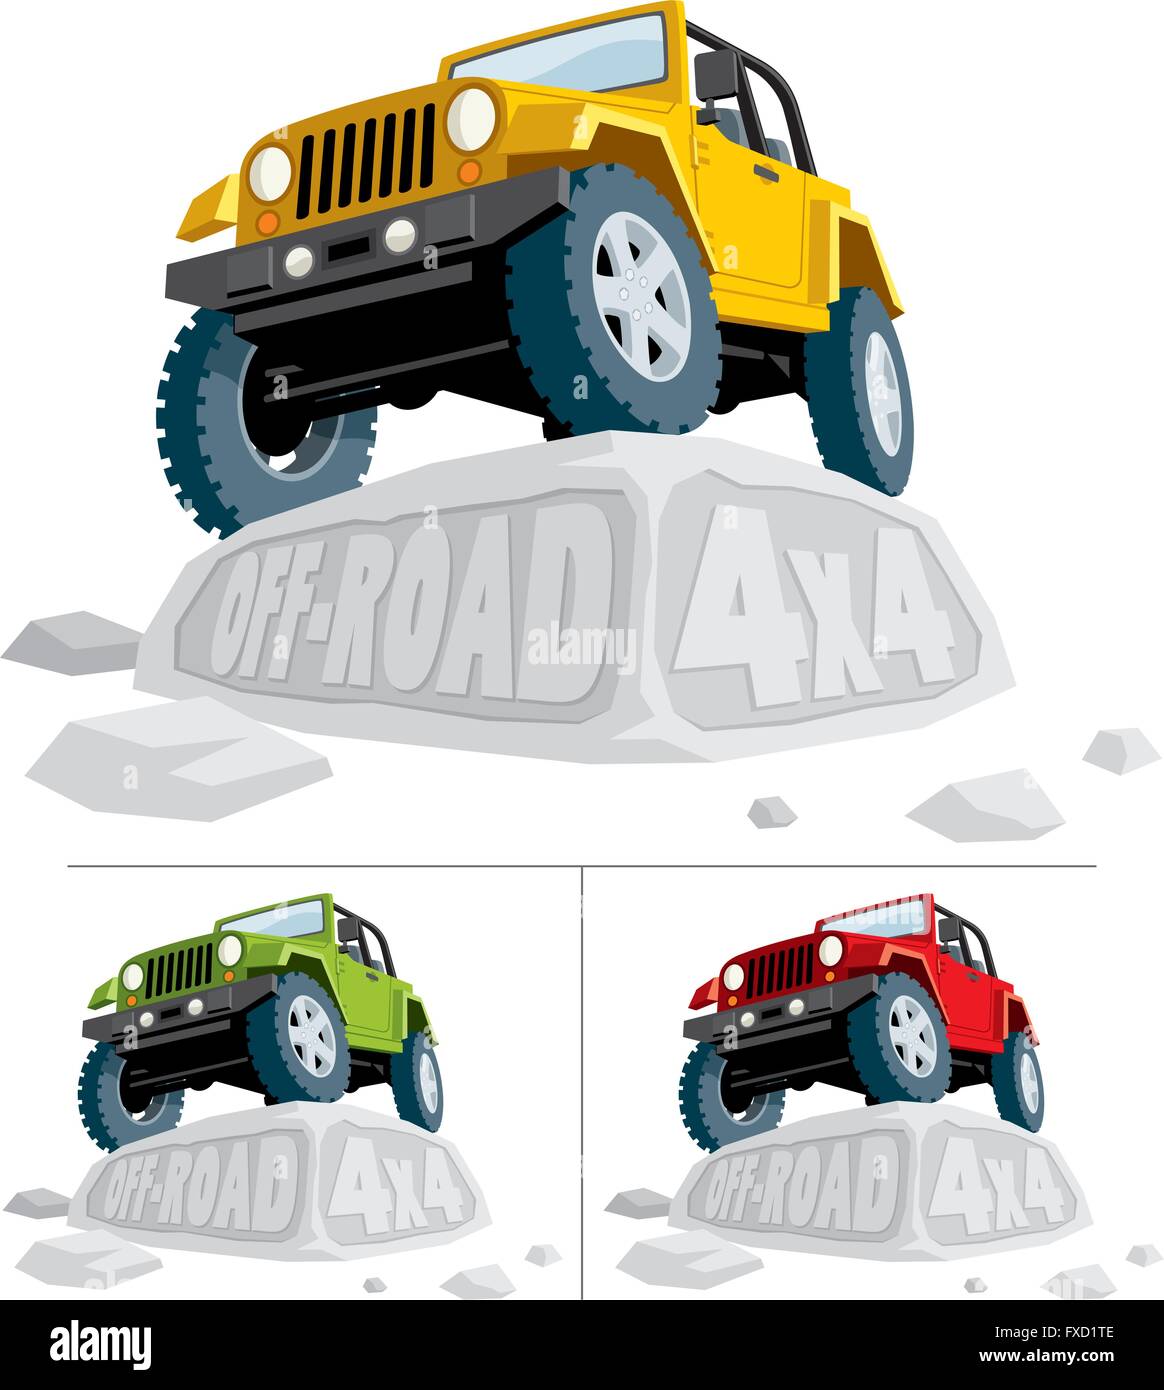 Off-road vehicle parked on boulder. You can replace the carved text with your own text. Vehicle is in 3 color versions. Stock Vector